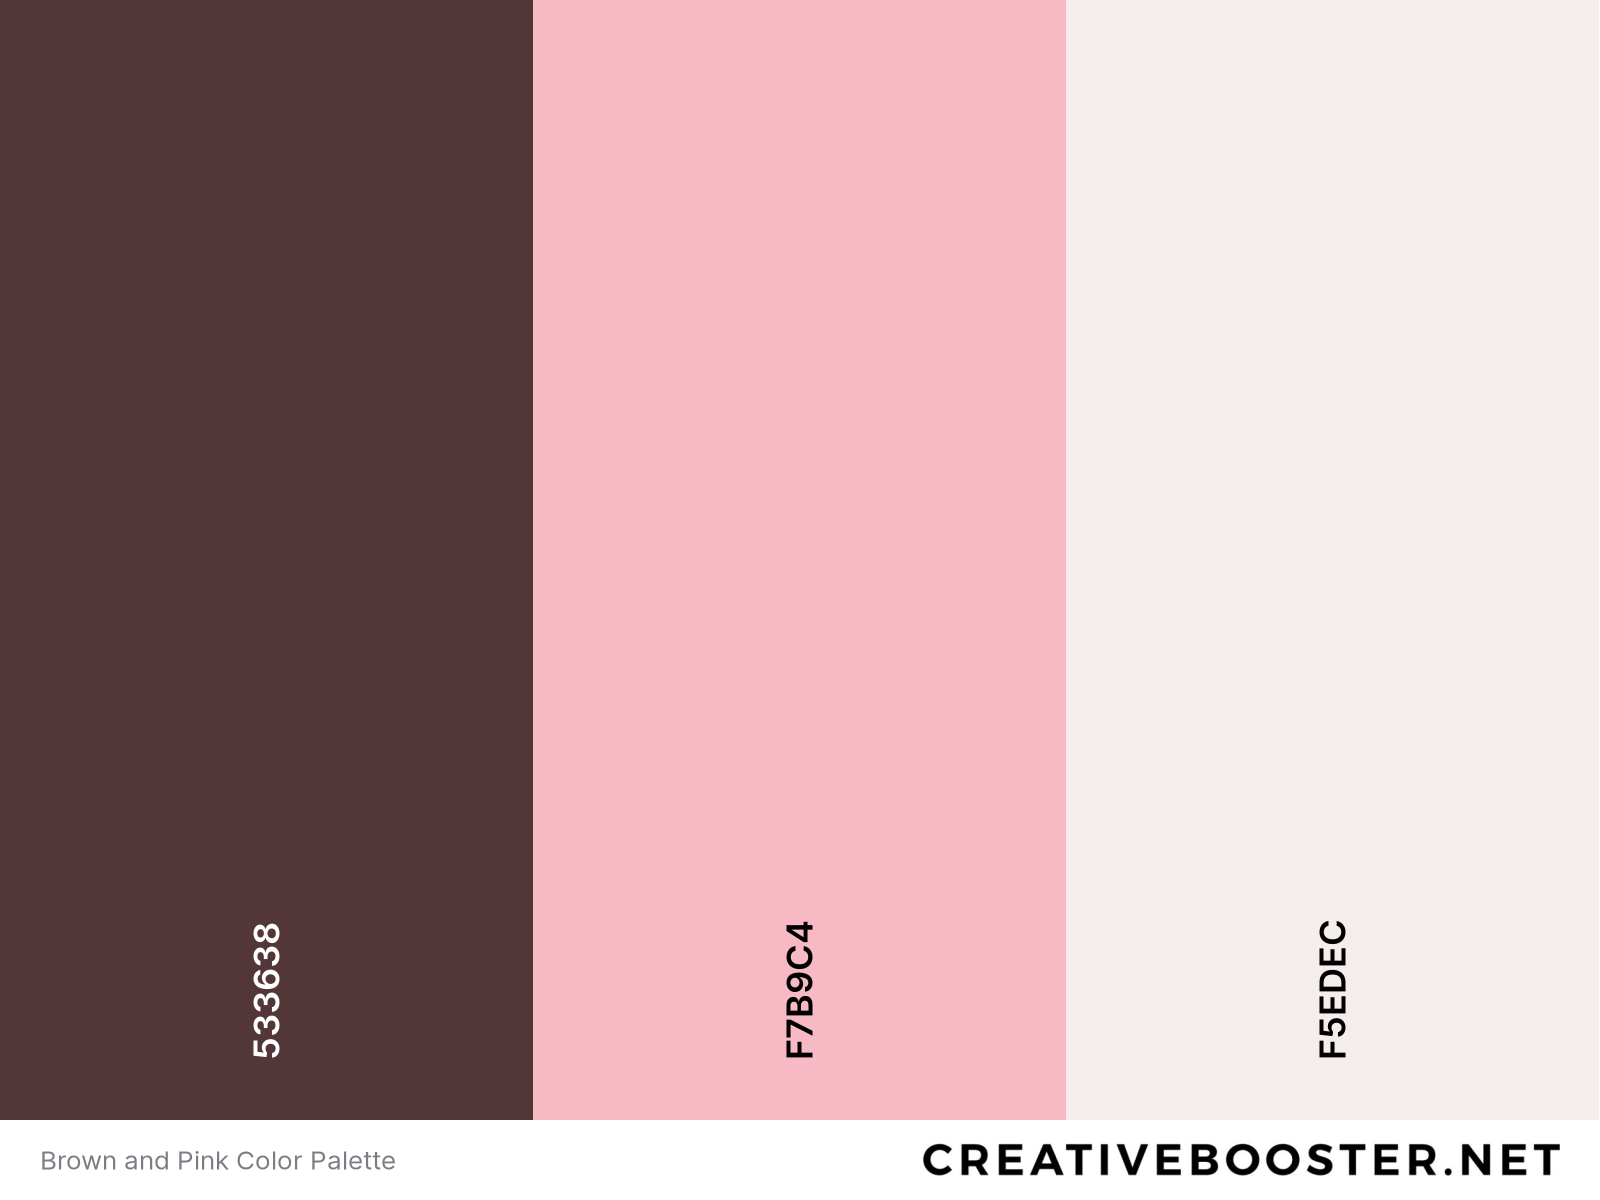 Brown and Pink Color Palette